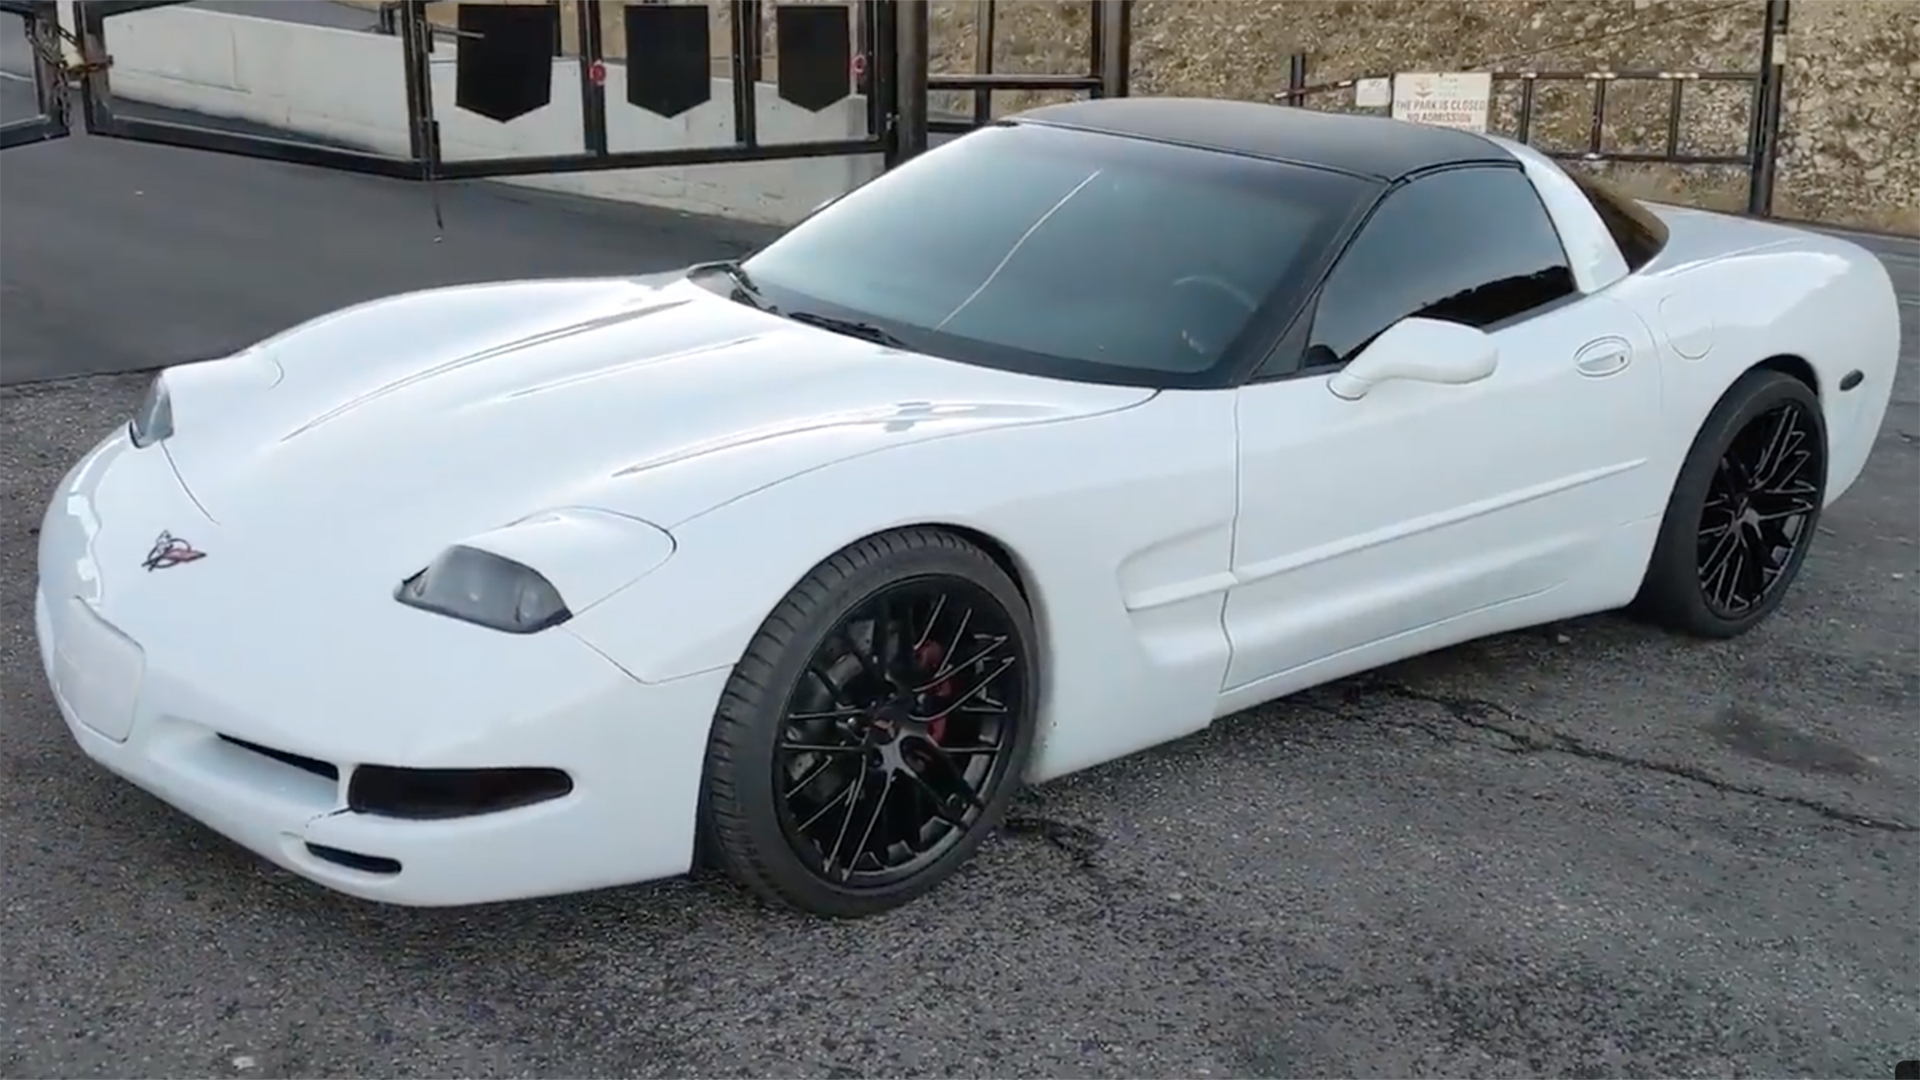 1998 C5 Chevrolet Corvette With 300,000 Miles Is A Steal | GM Authority